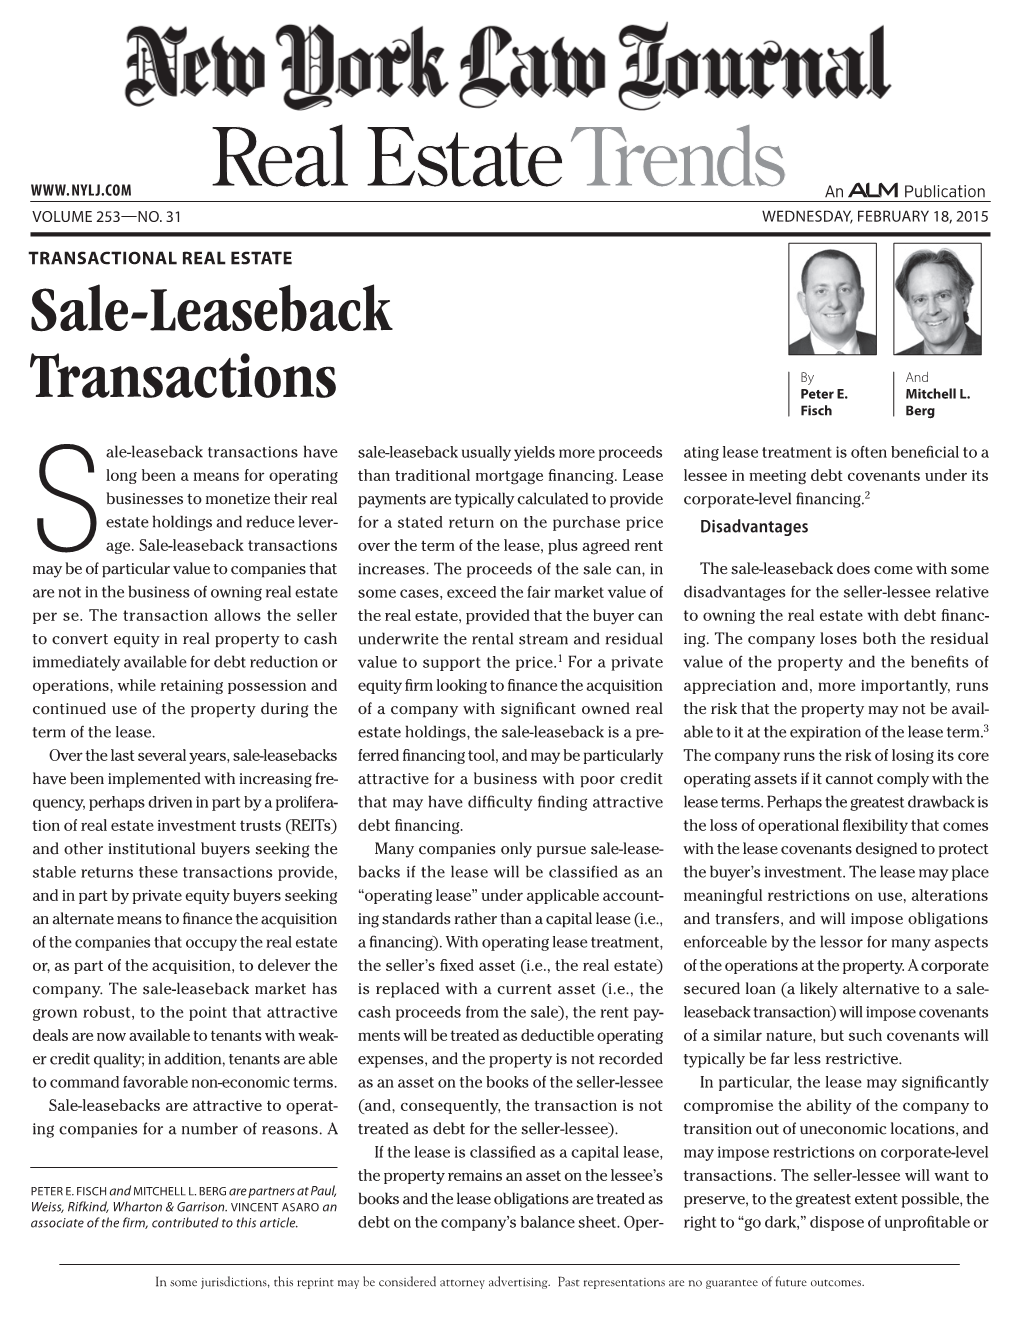 Sale-Leaseback Transactions Over the Term of the Lease, Plus Agreed Rent Mays Be of Particular Value to Companies That Increases